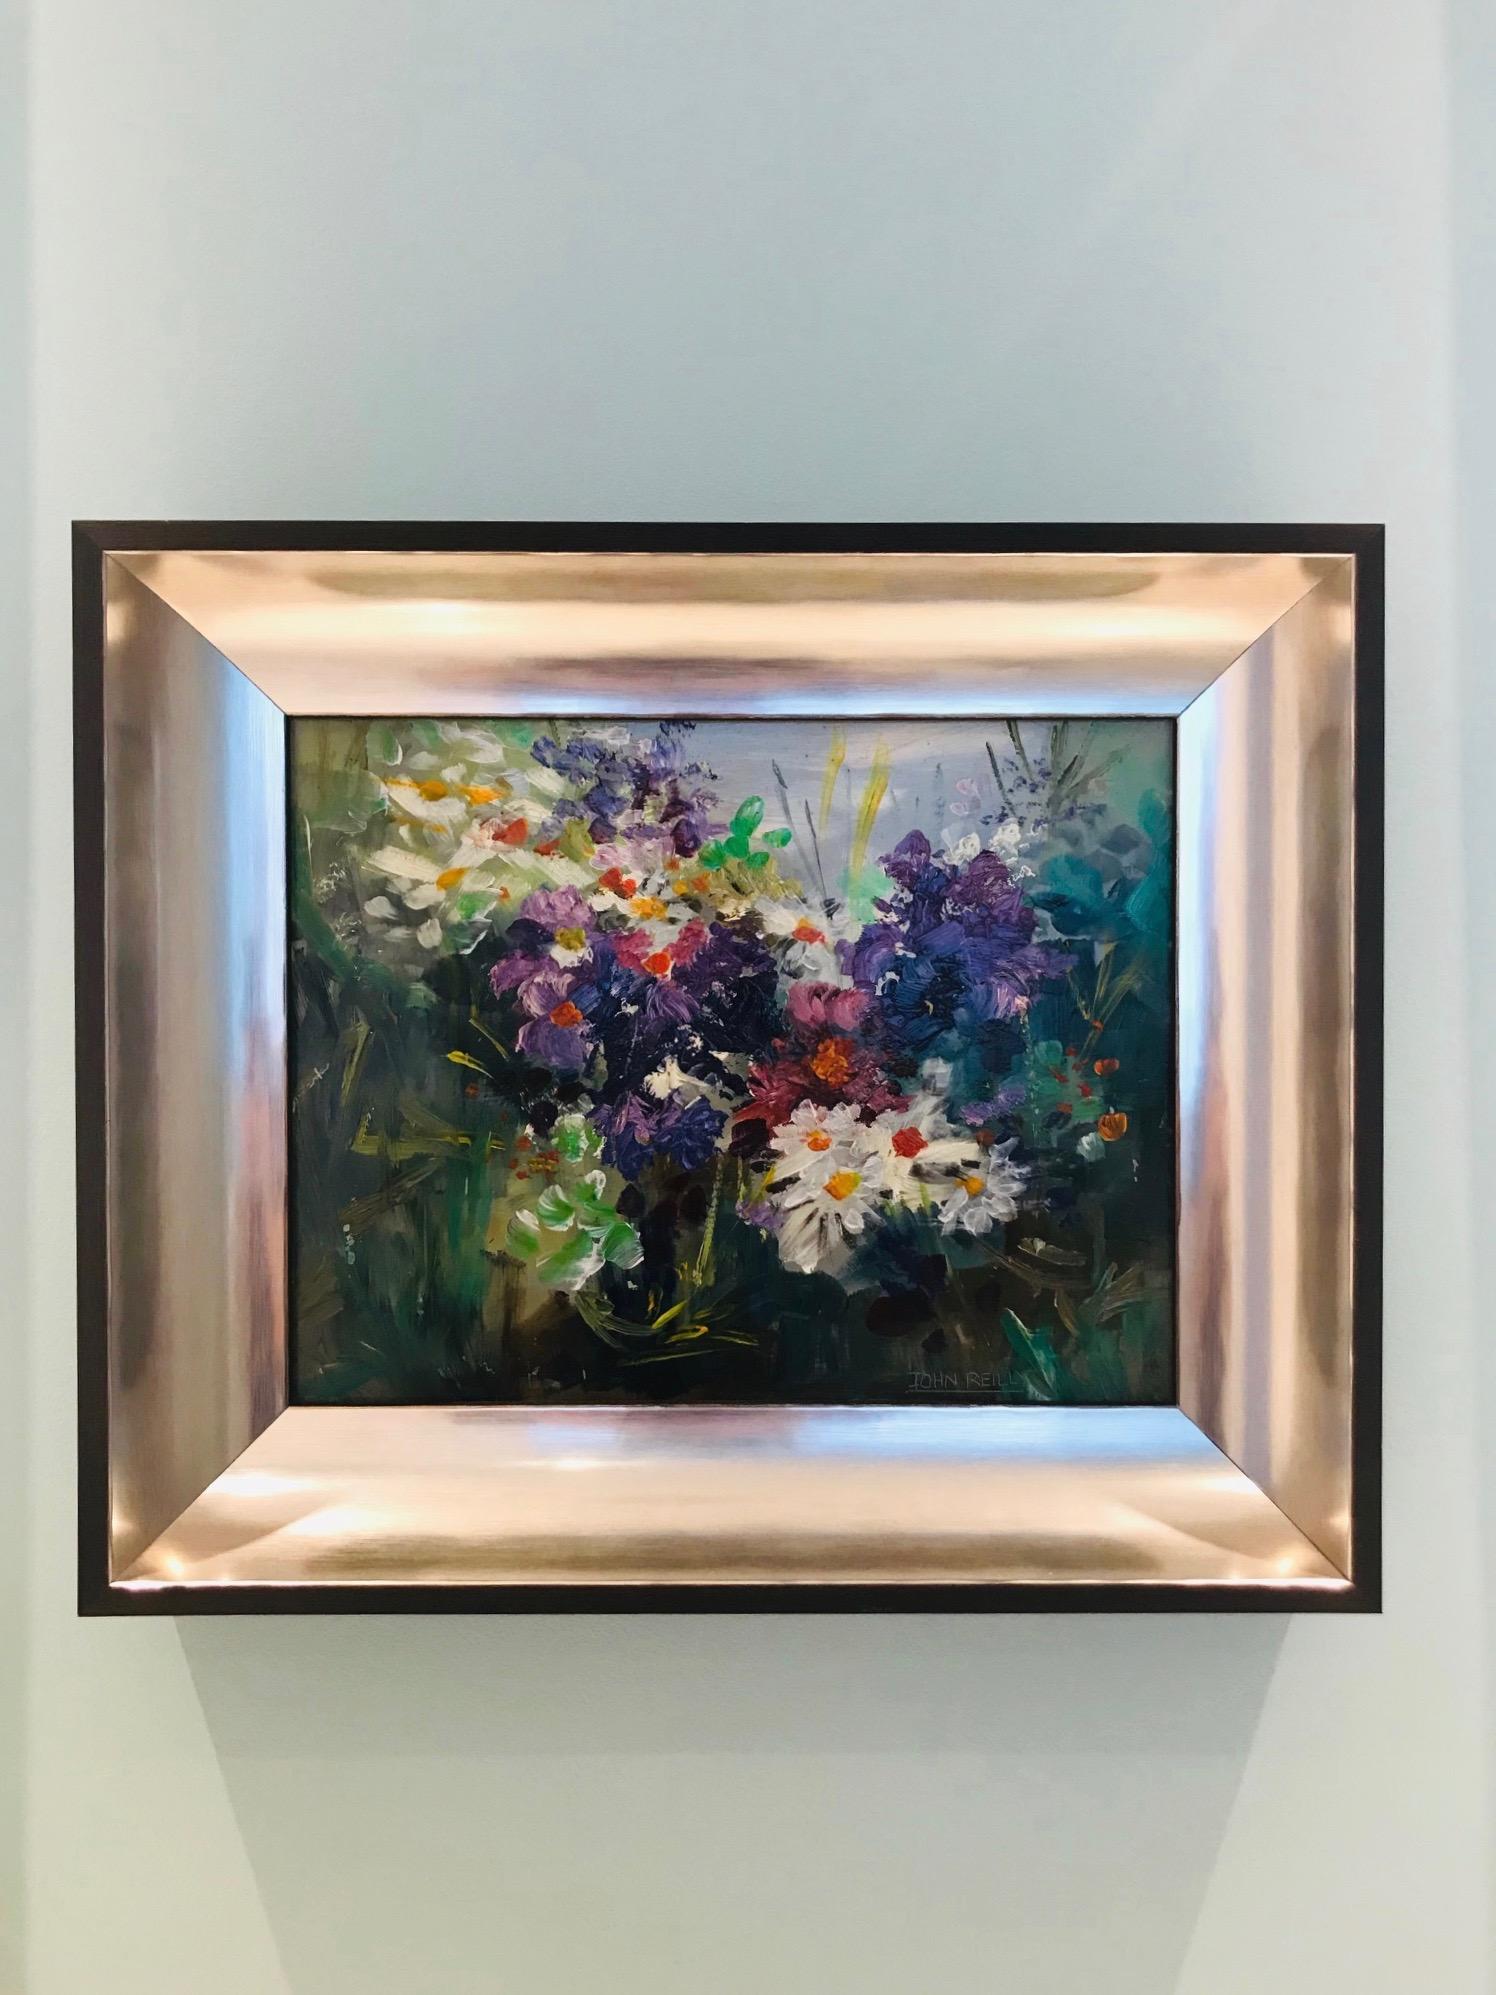 Outstanding contemporary impressionist still life painting depicting a series of wildflowers. Oil on board in custom shadow box frame with ebonized wood exterior and molded interior in satin white gold. Signed on lower right corner by American